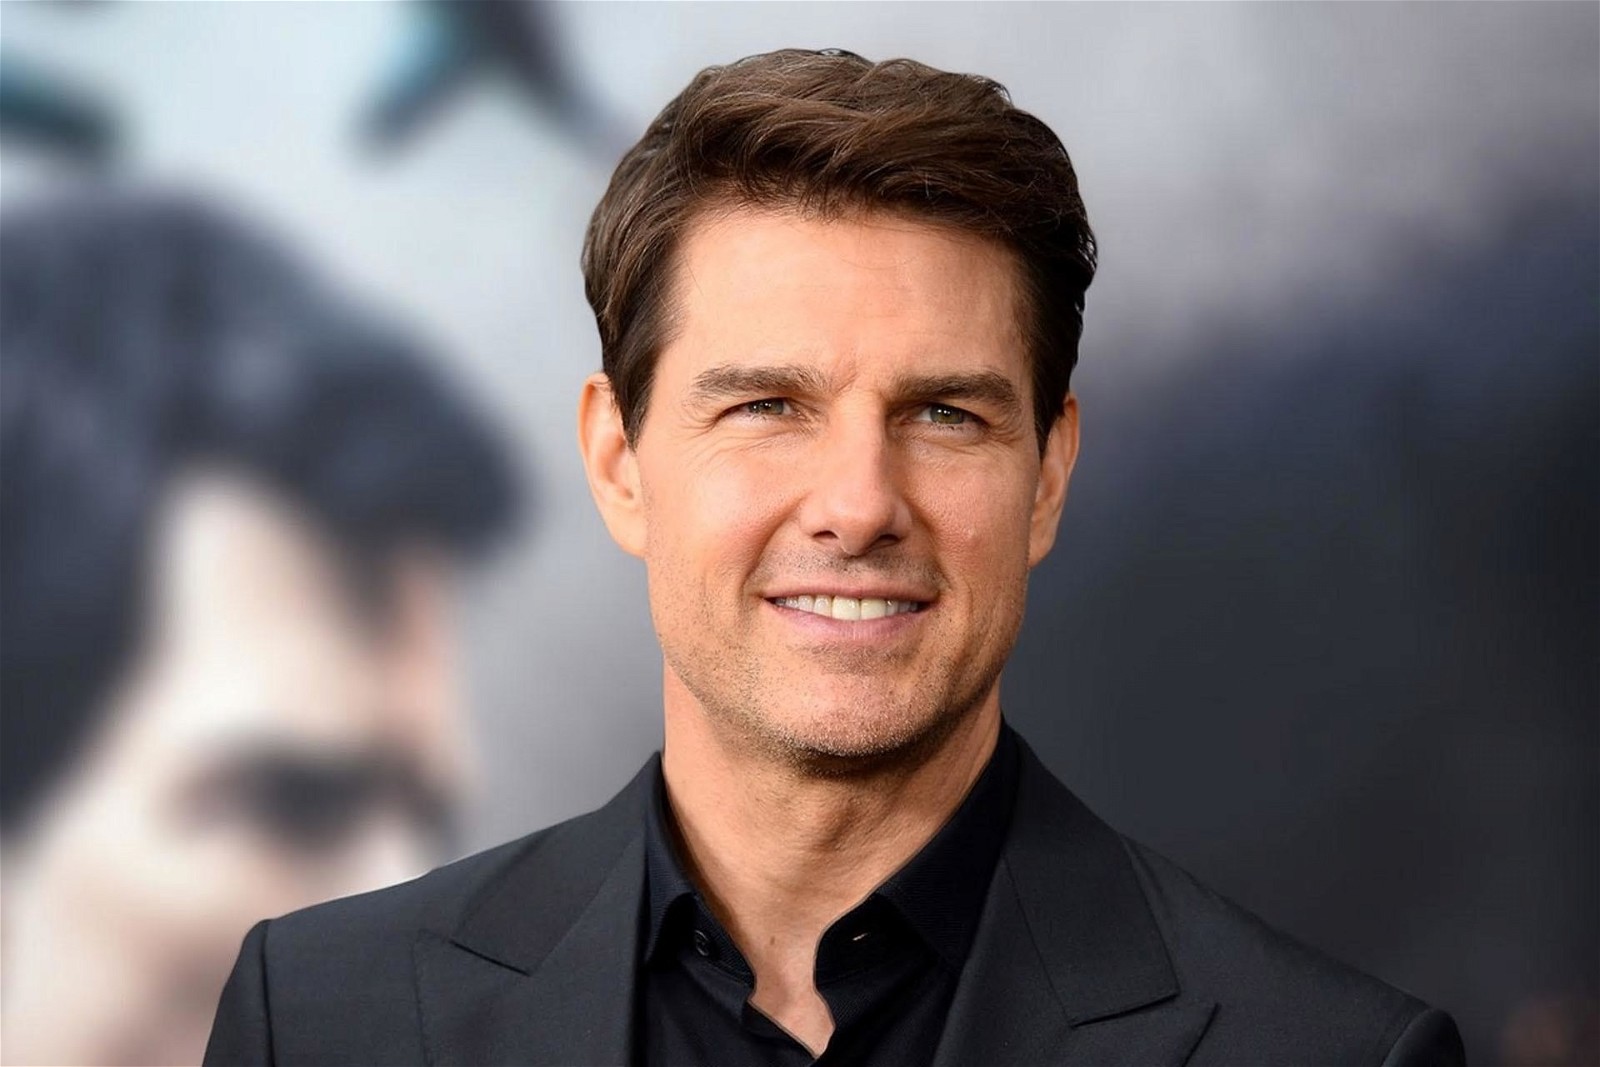 Tom Cruise is reported to be possibly retiring from the Mission: Impossible franchise